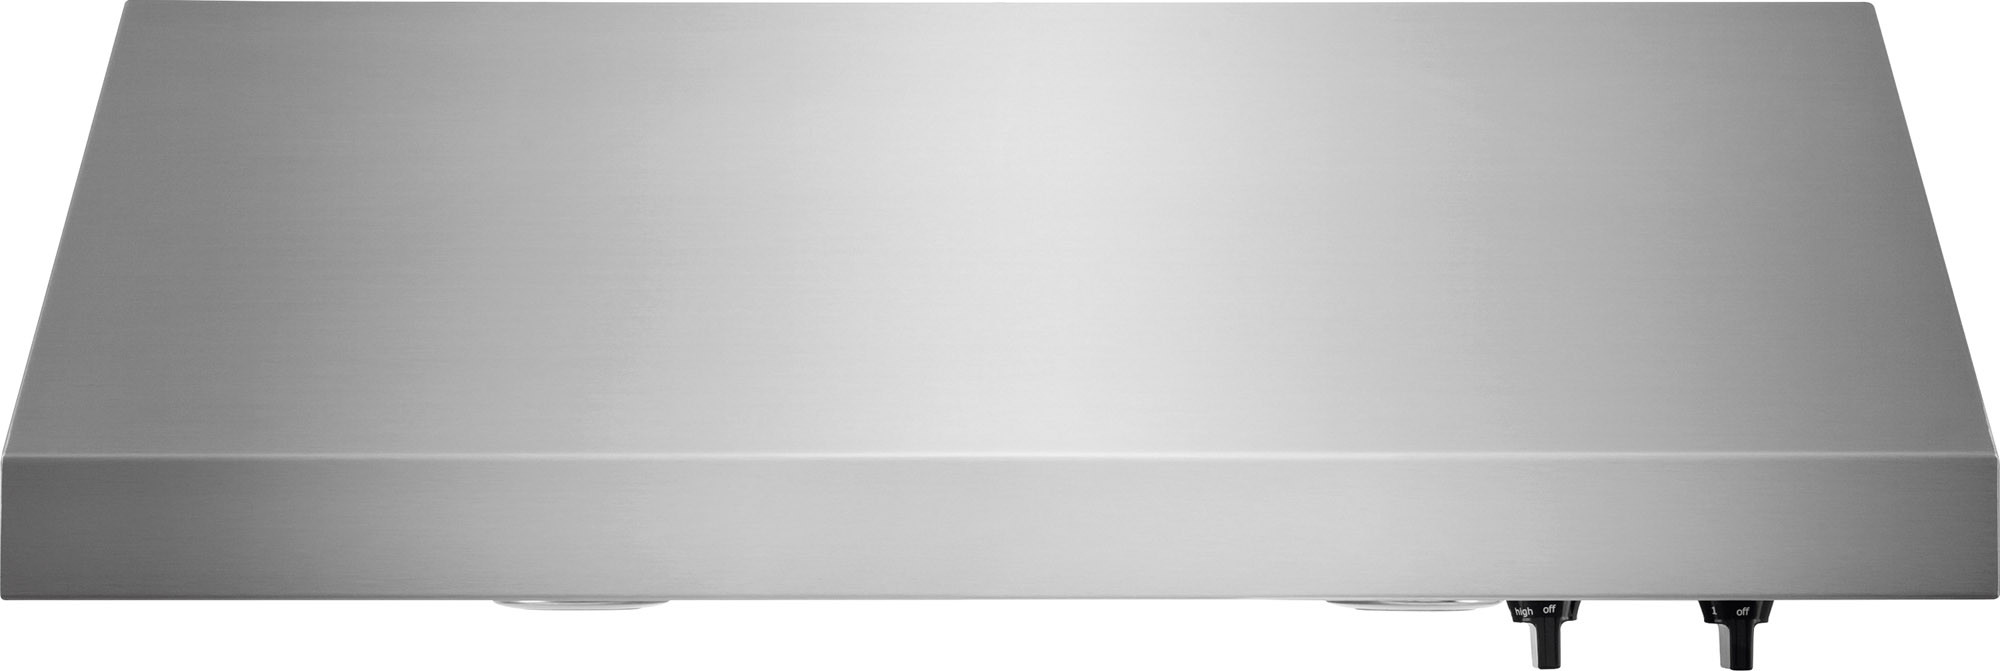 ICON 36"" Wall Mount Canopy Pro Style Range Hood - Electrolux E36WV60PPS